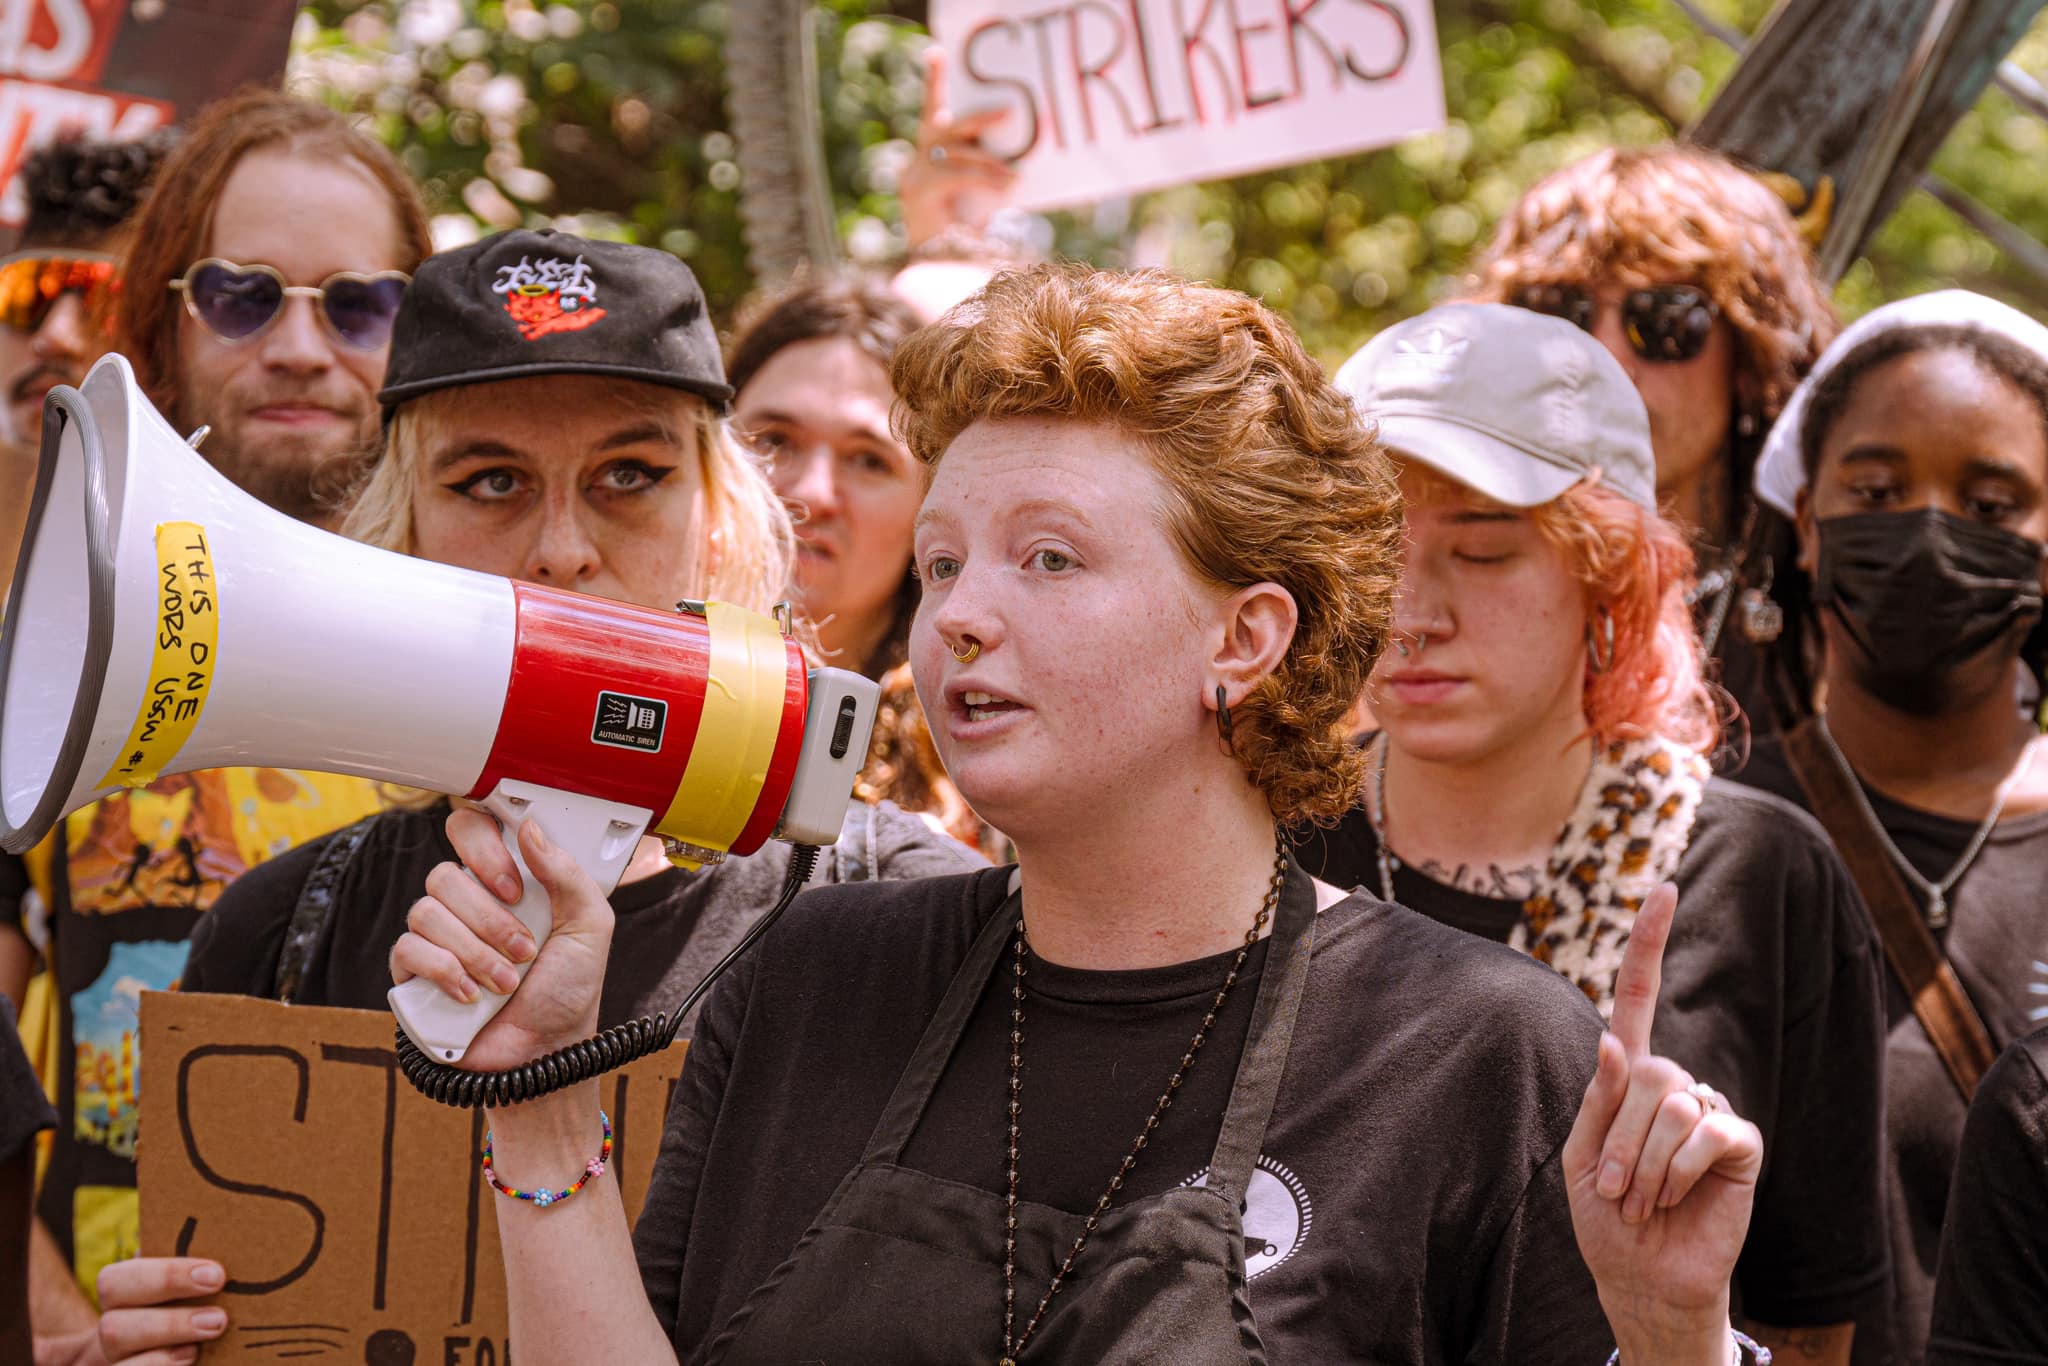 a group of folks standing behind a person with a megaphone